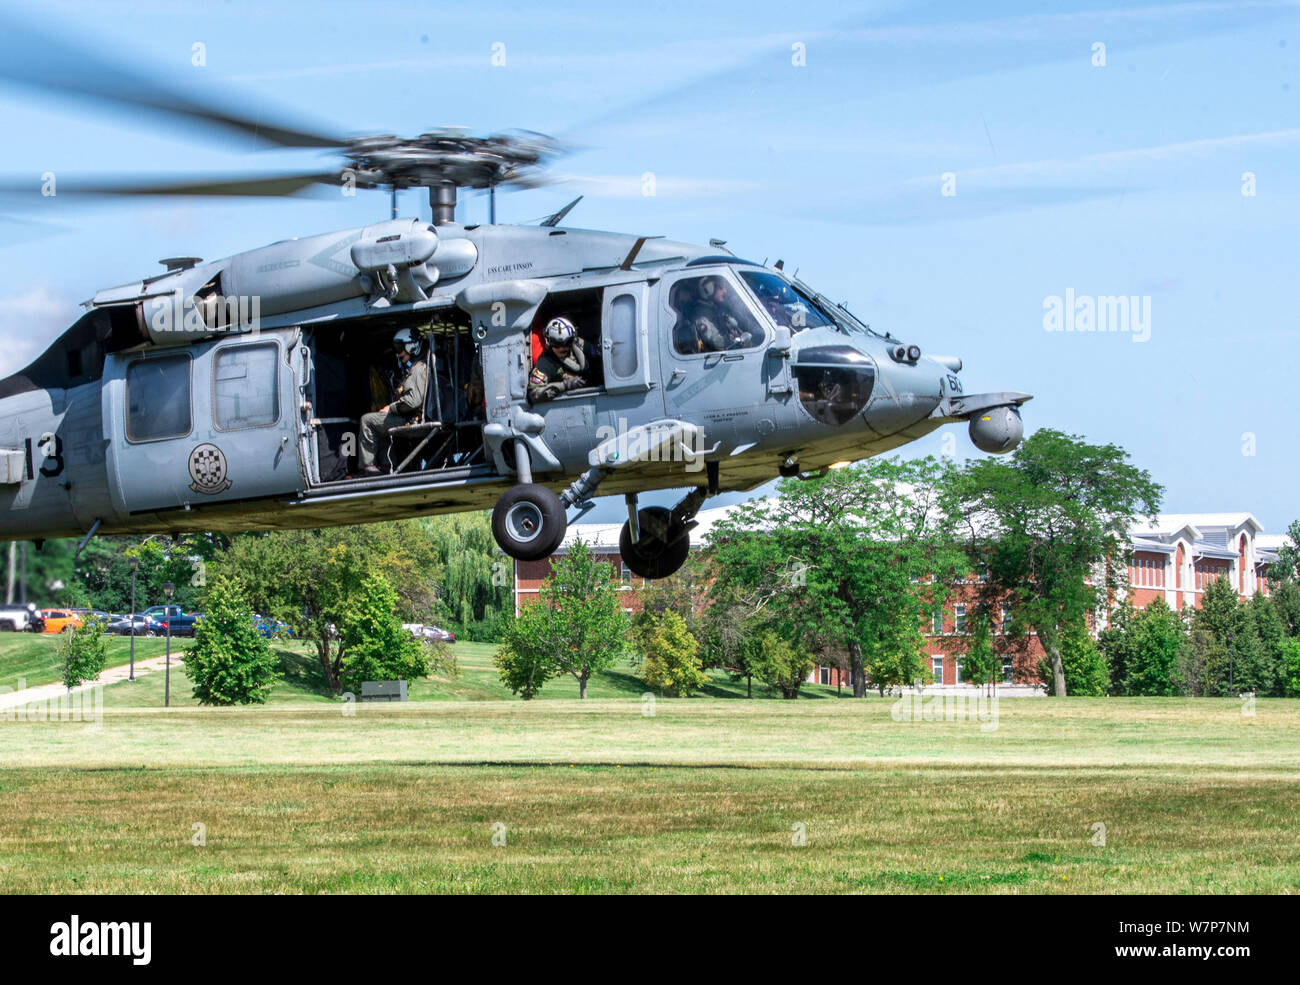 190802-N-PL946-2064 GREAT LAKES, Ill. (Aug. 2, 2019) An MH-60S Seahawk helicopter from the Helicopter Sea Combat Squadron Four (HSC-4) “Black Knights,” stationed in San Diego, prepares to land on one of the lawns at Recruit Training Command to meet with and commission their sponsored recruit division. More than 35,000 recruits train annually at the Navy's only boot camp. (U.S. Navy photo by Mass Communication Specialist 1st Class Spencer Fling/Released) Stock Photo